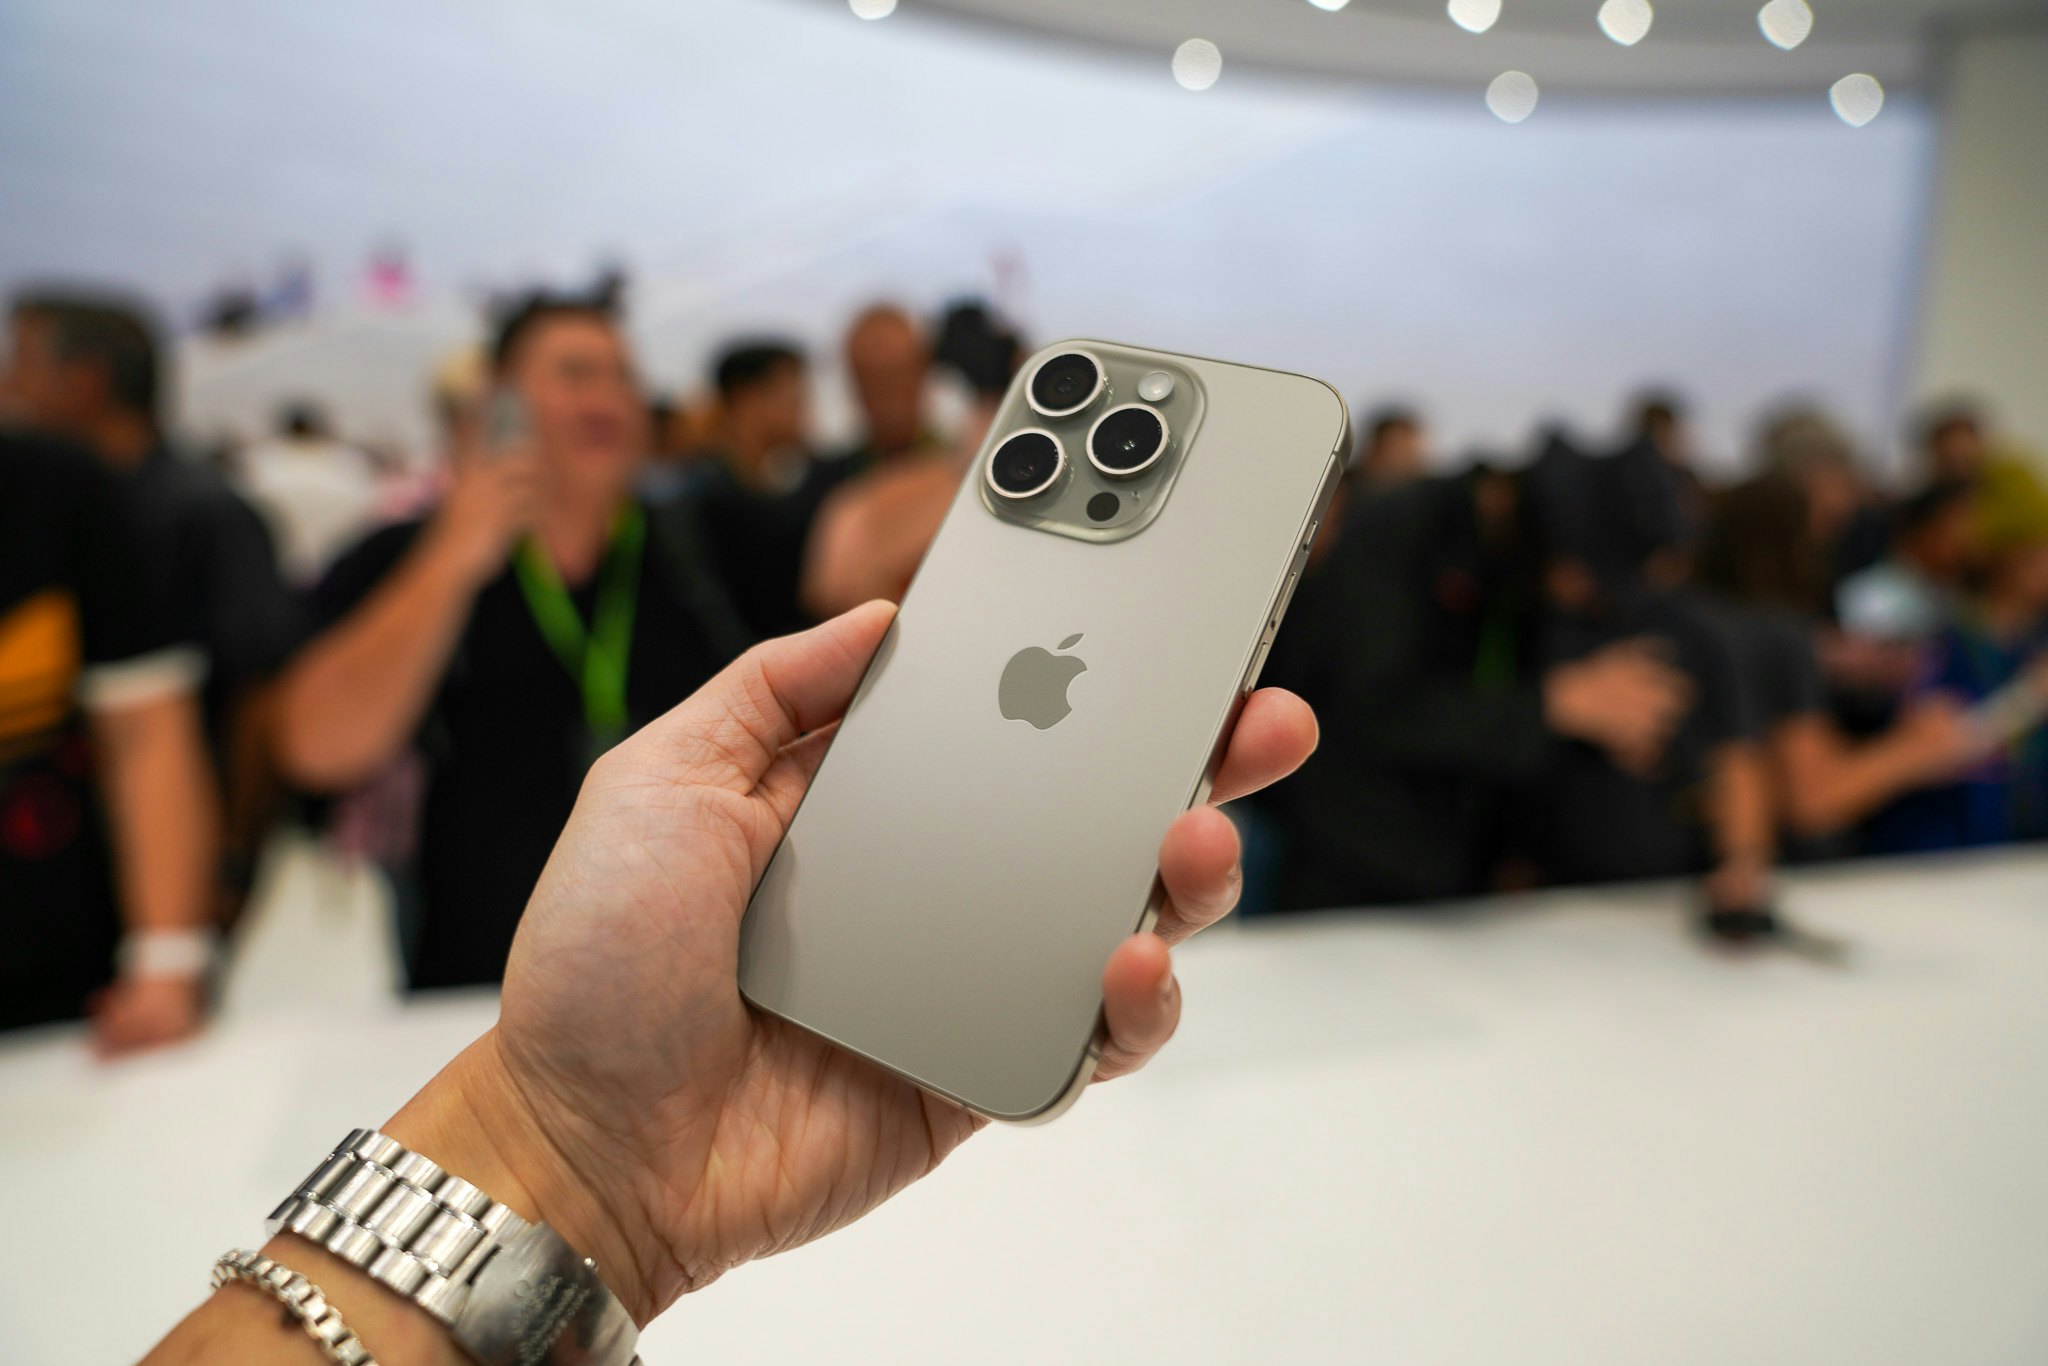 The iPhone 12 Pro Max made me feel like a Kardashian and I loved